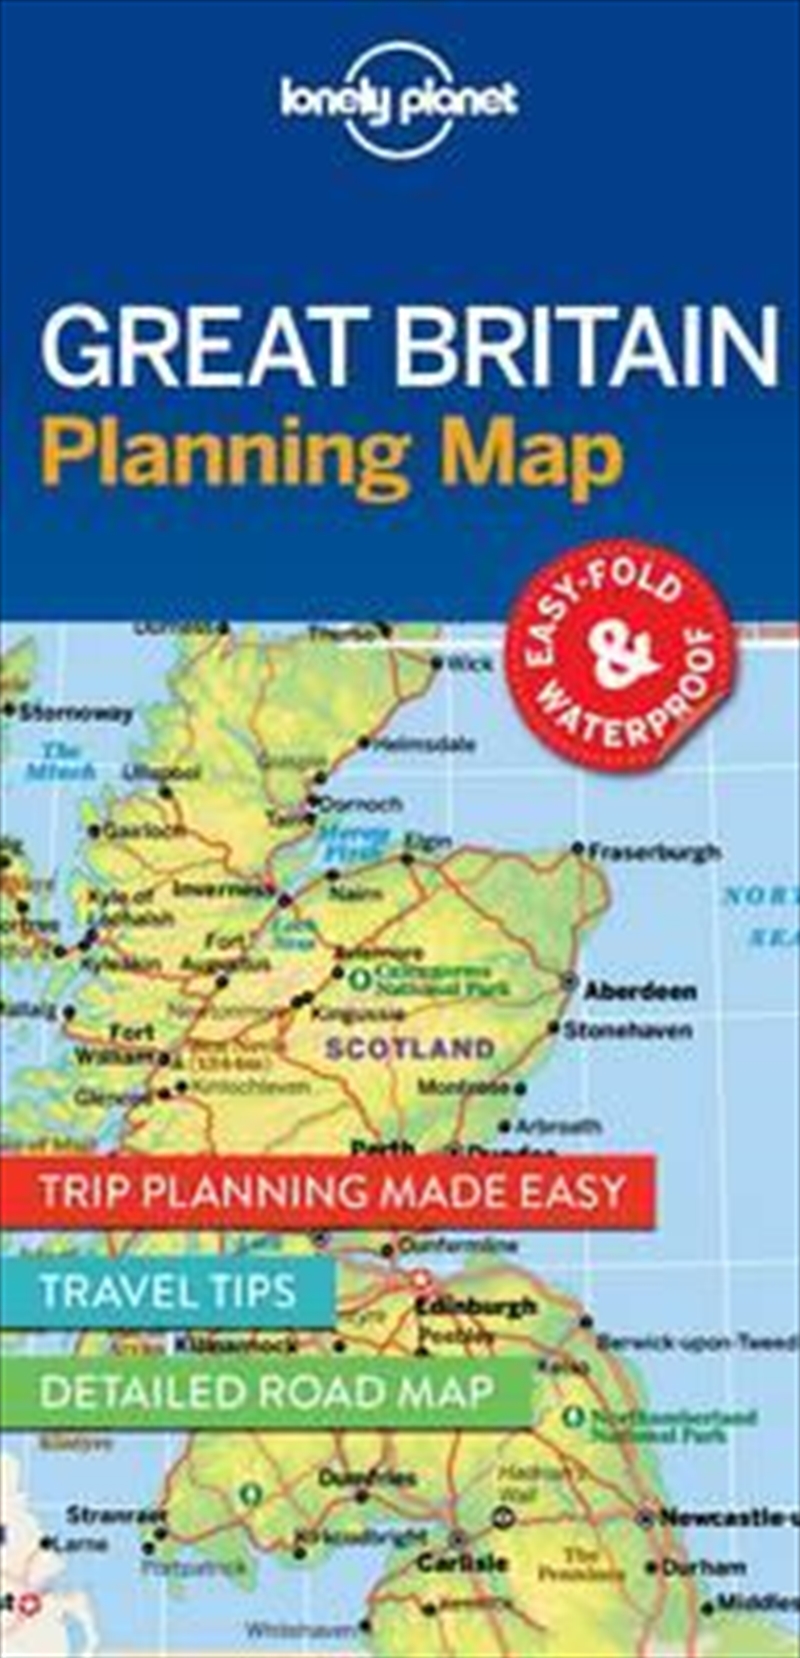 Lonely Planet Great Britain Planning Map/Product Detail/Travel & Holidays